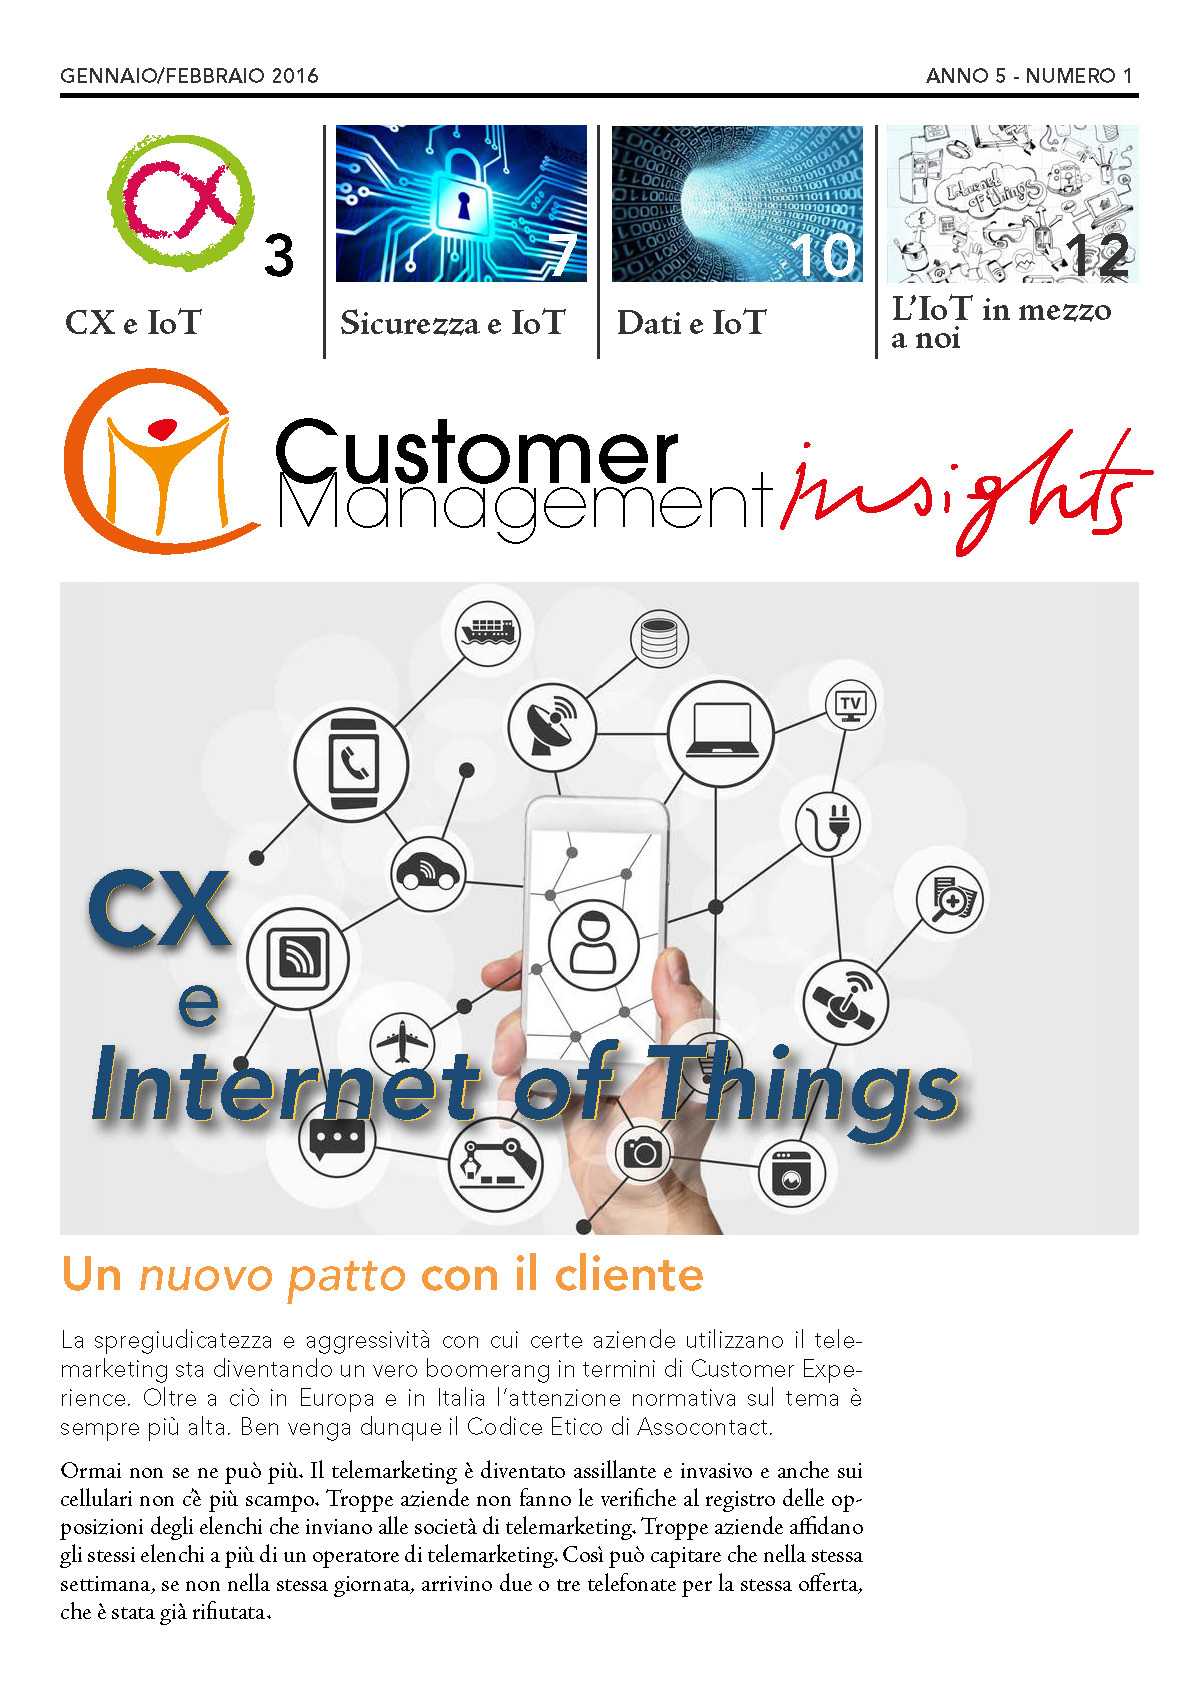 Customer Experience e Internet of Things – CMI anno 5 n.1